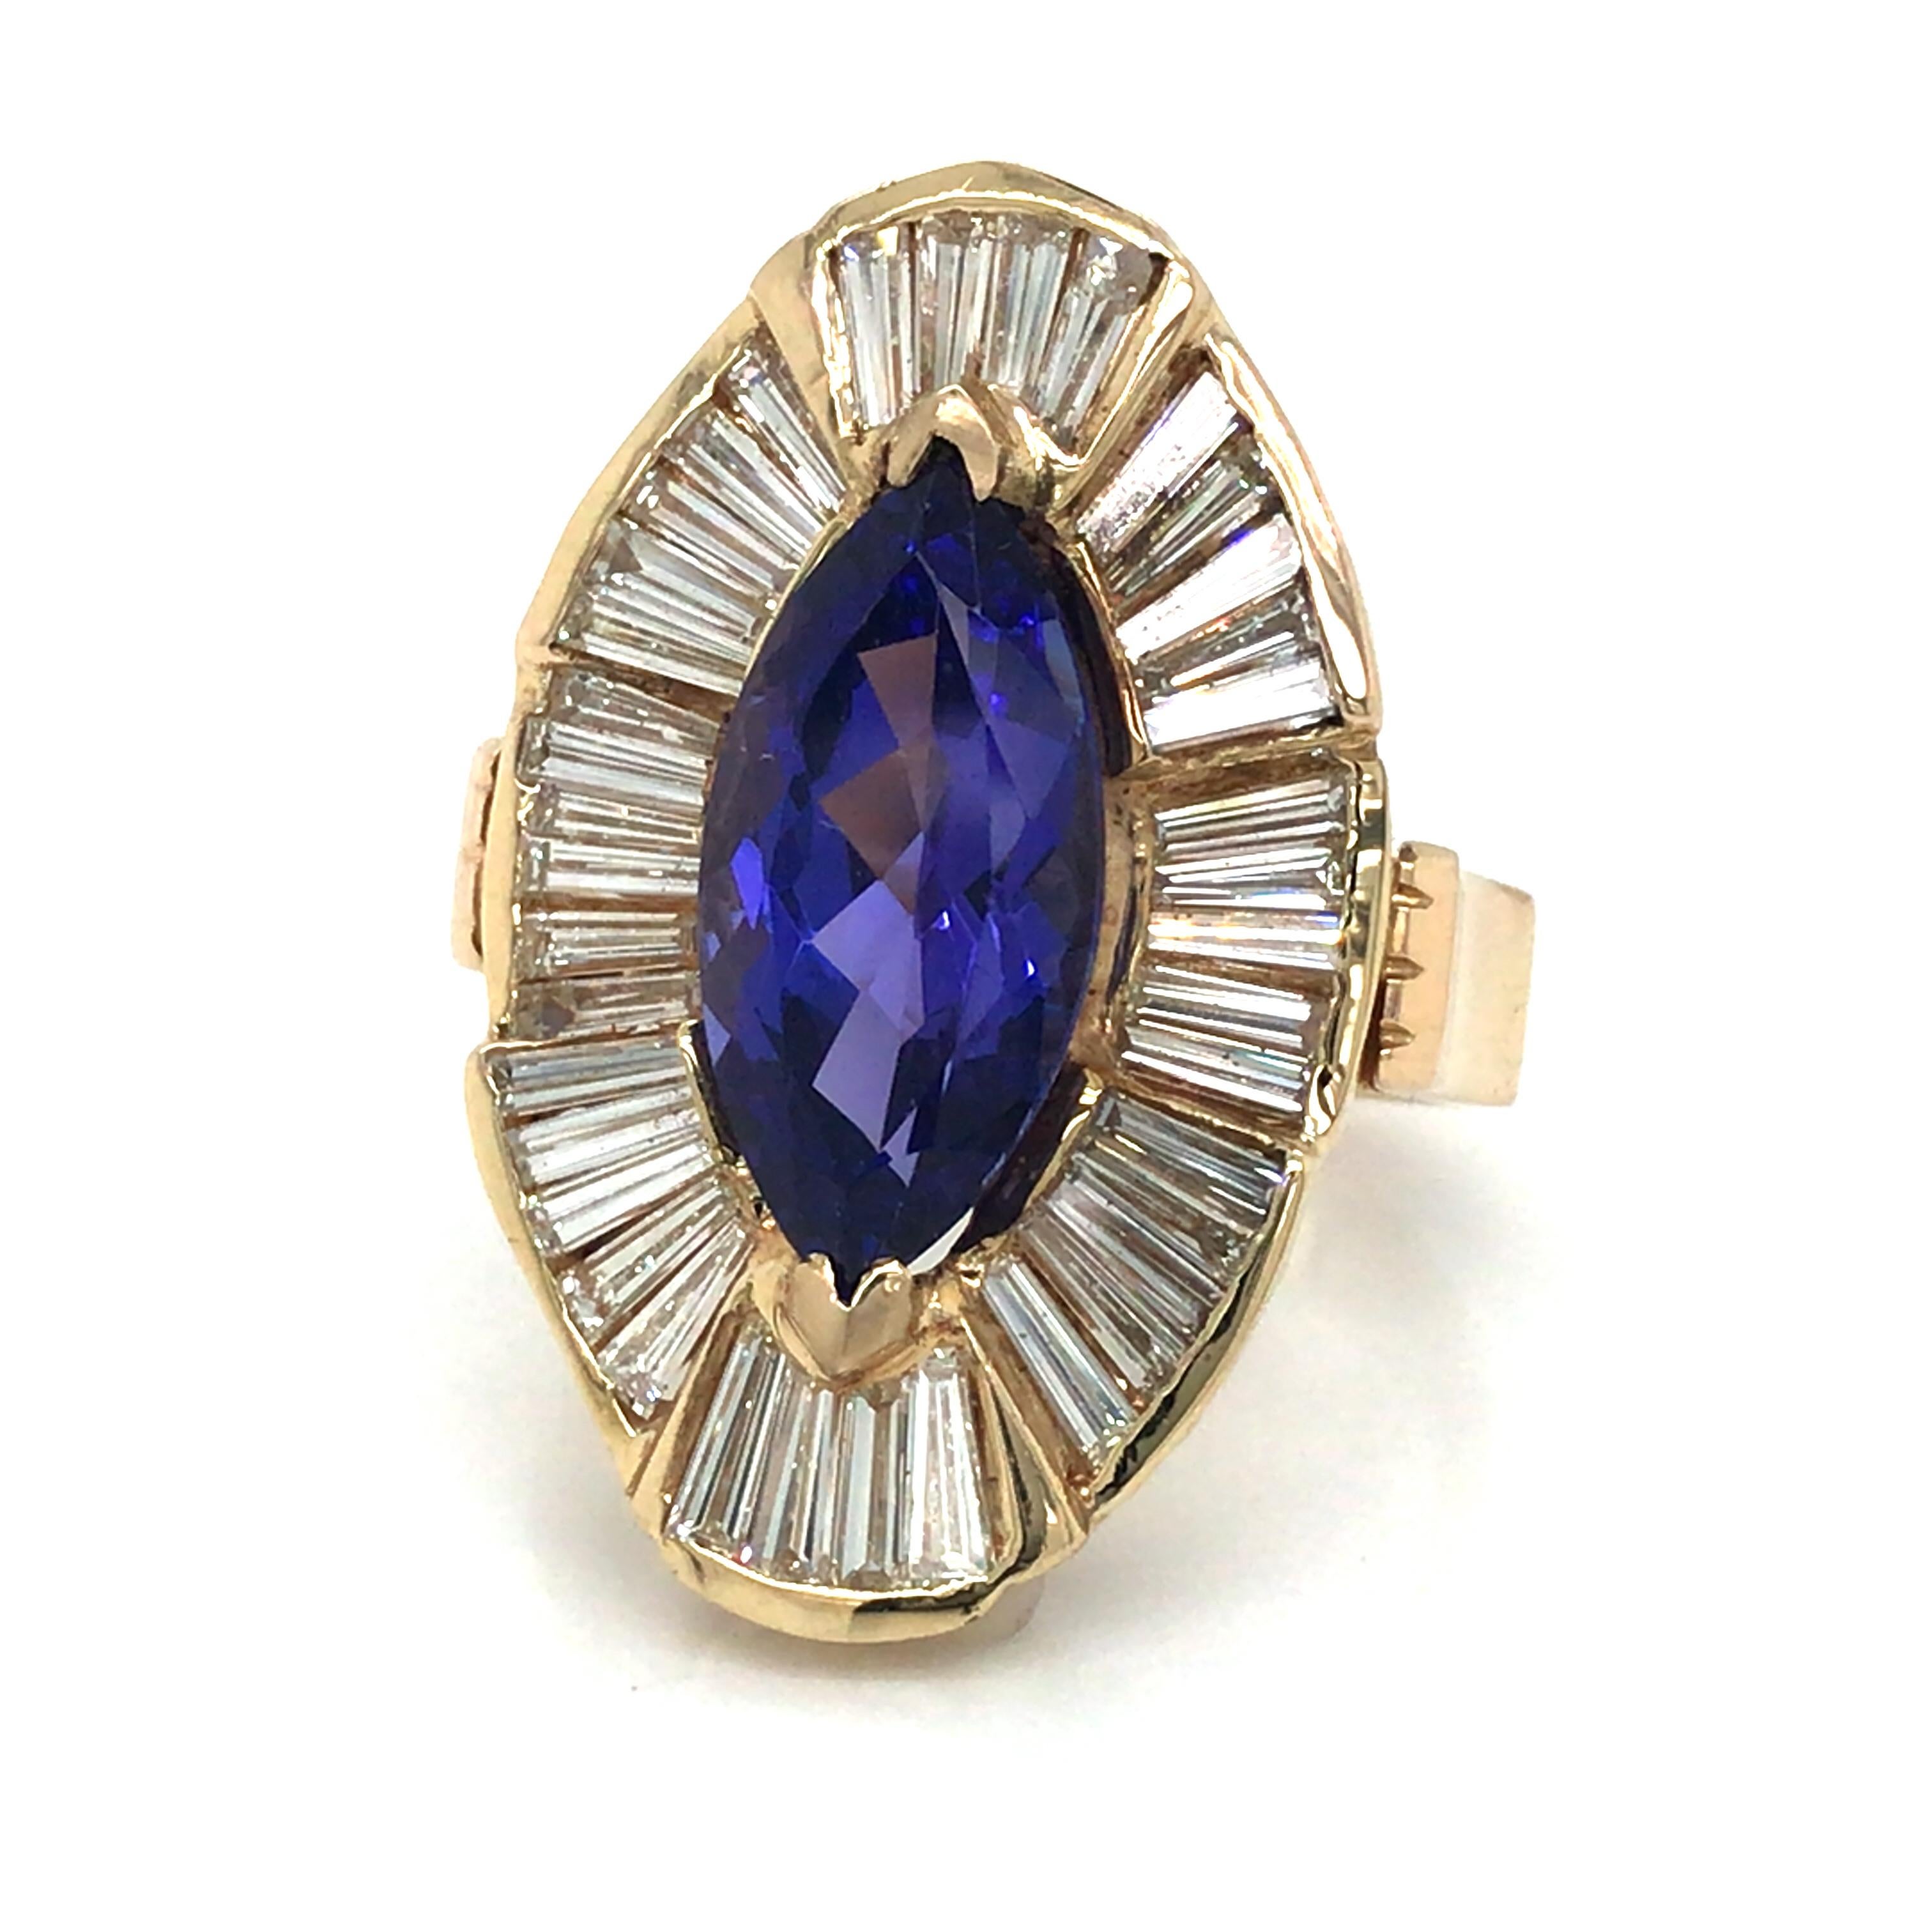 Tanzanite and Diamond Ring in 14K Yellow Gold.  Baguette Diamonds weighing 4.03 carat total weight, G-I in color and VS-SI in clarity are expertly set around the 6.20 Carat Tanzanite Center.  The Ring measures 1 1/4 inch in length and 5/8 inch in